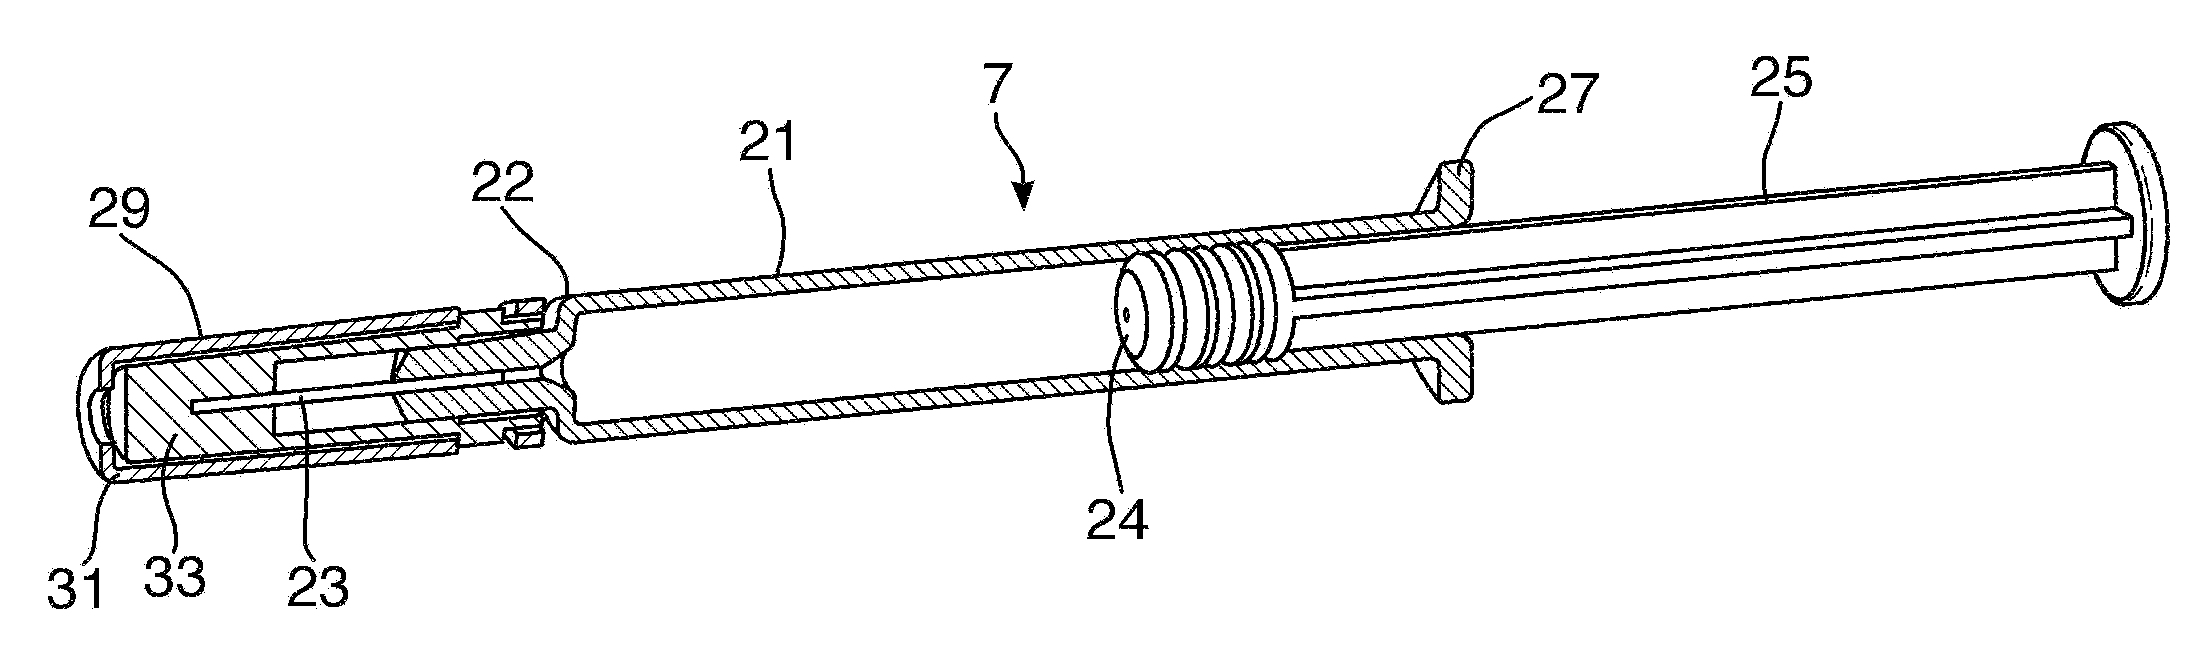 Injection device